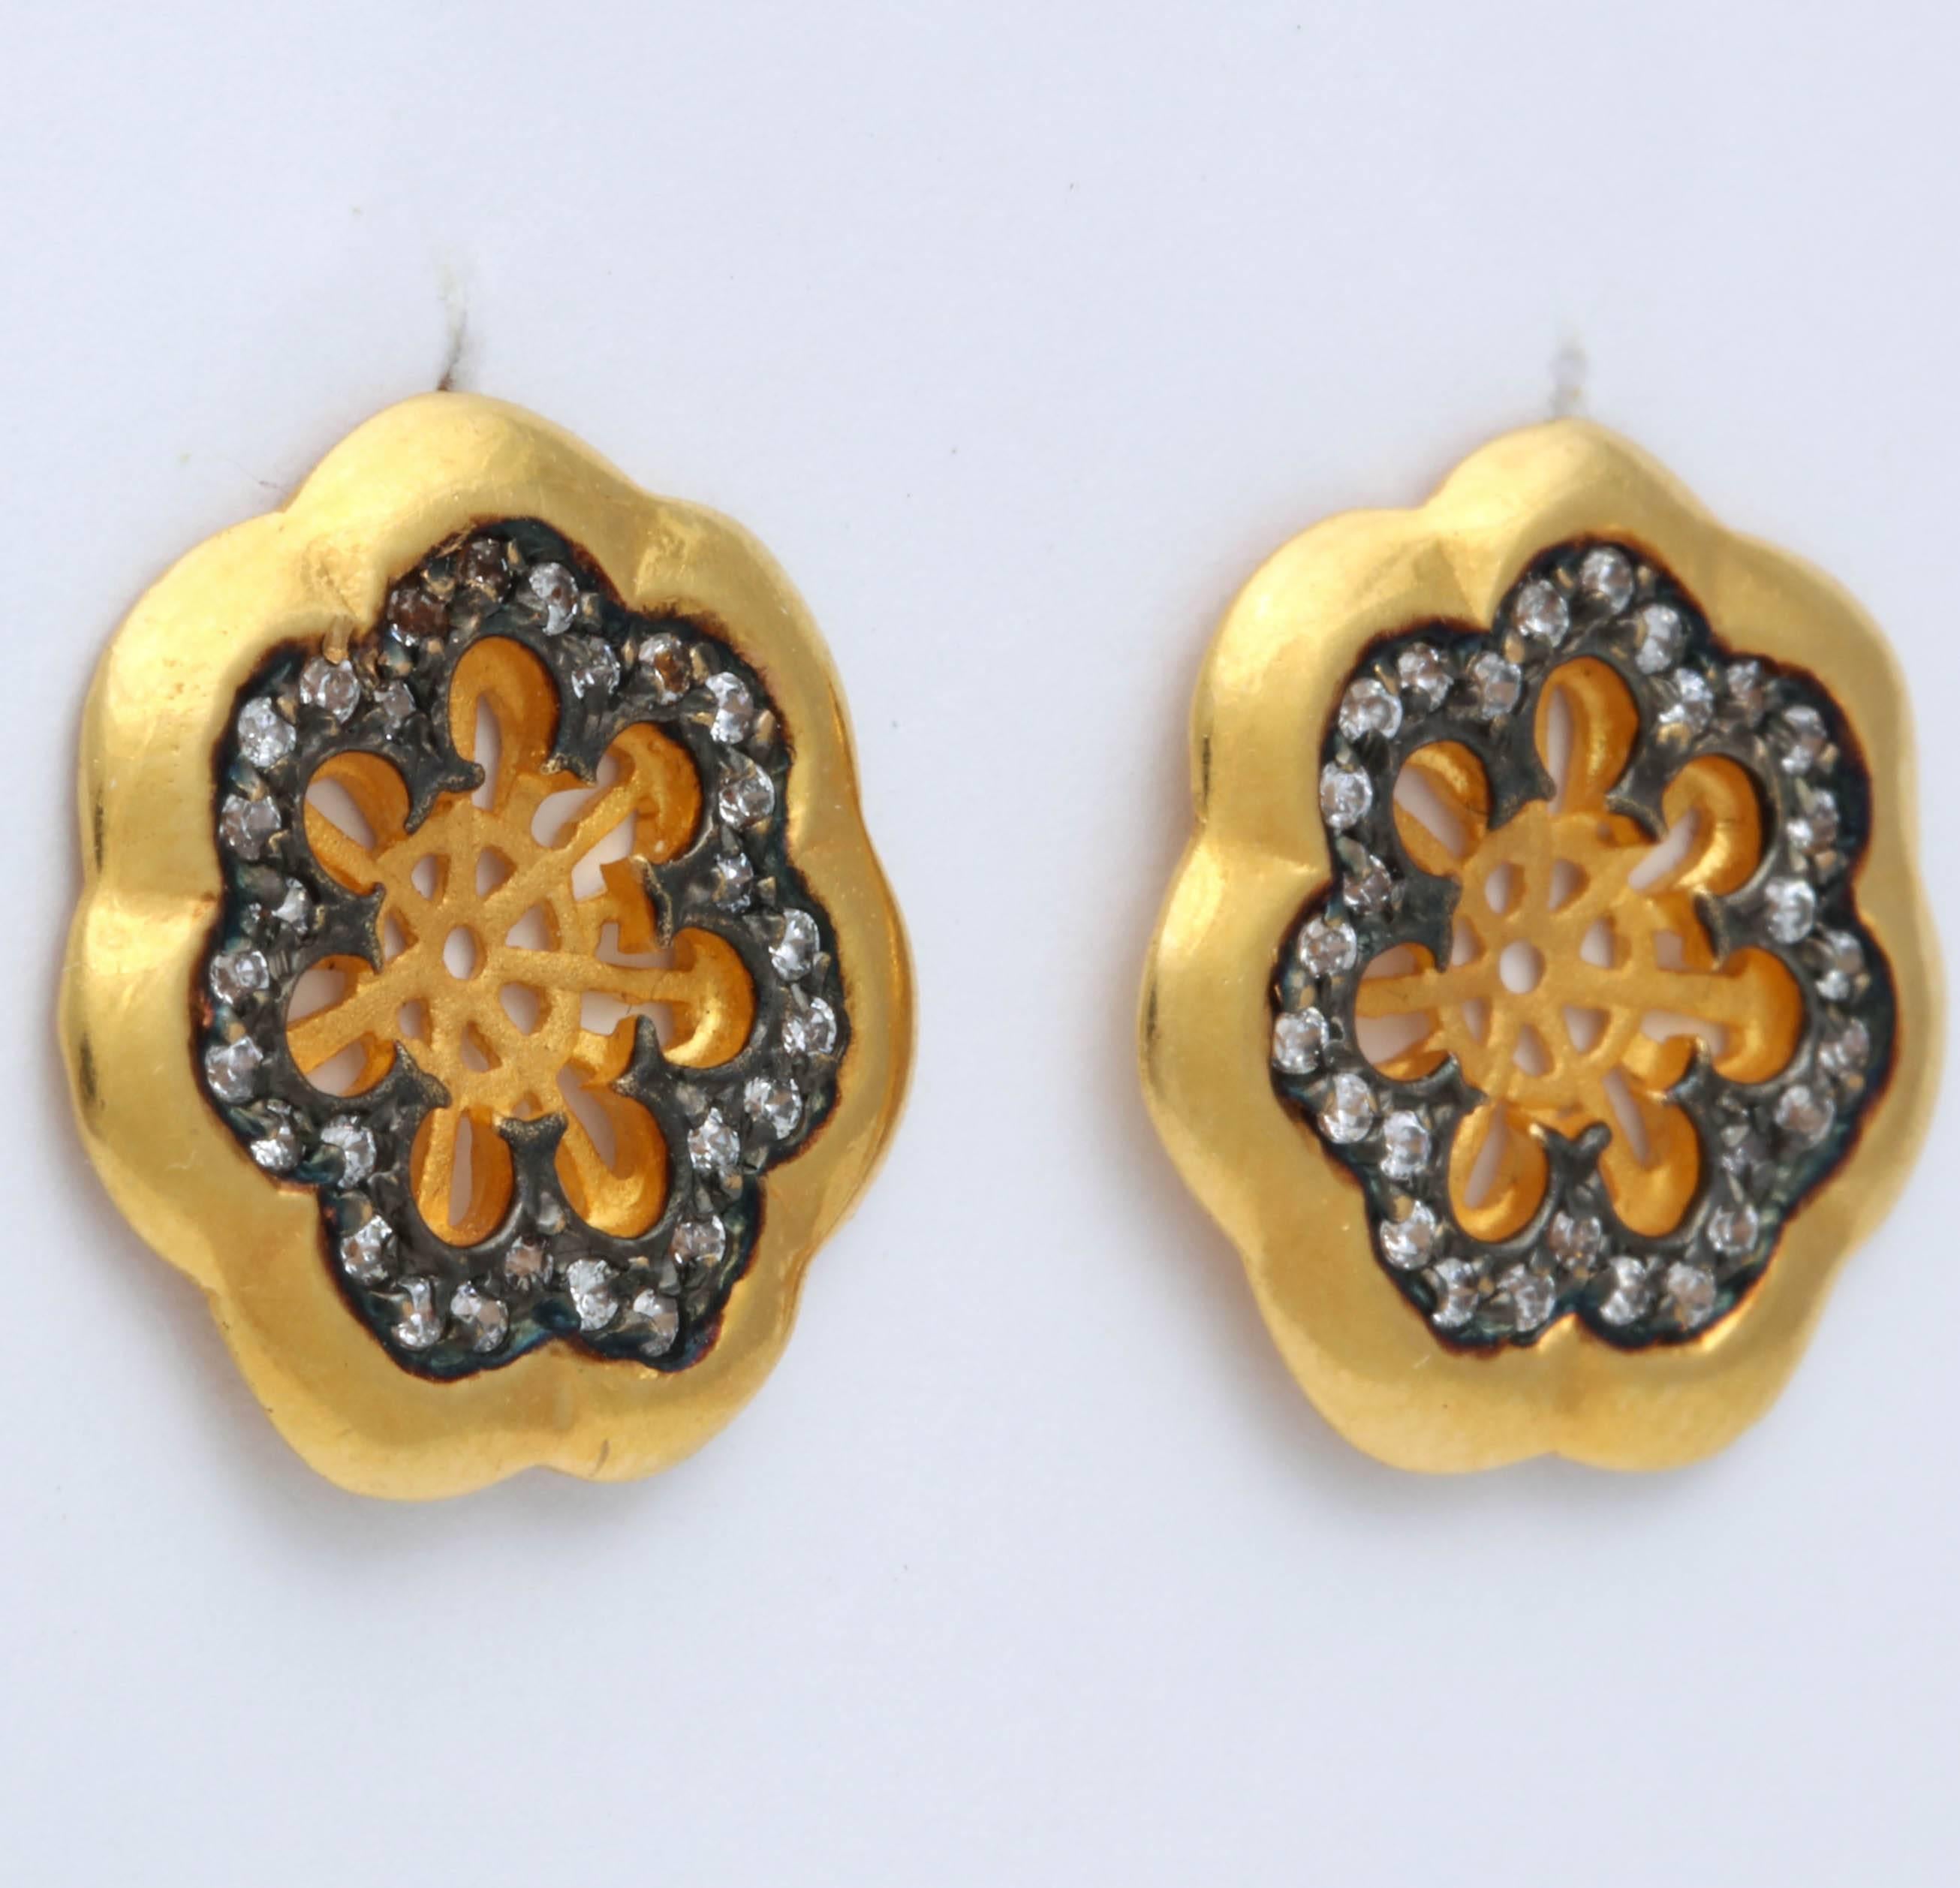 These are 22 kt plus gold earrings. The single cut diamonds are about .84 cts and are set in oxidized silver. The contrast between the bright yellow gold and dark silver is striking.The center is a delicately cut out flower center and is  in a matte